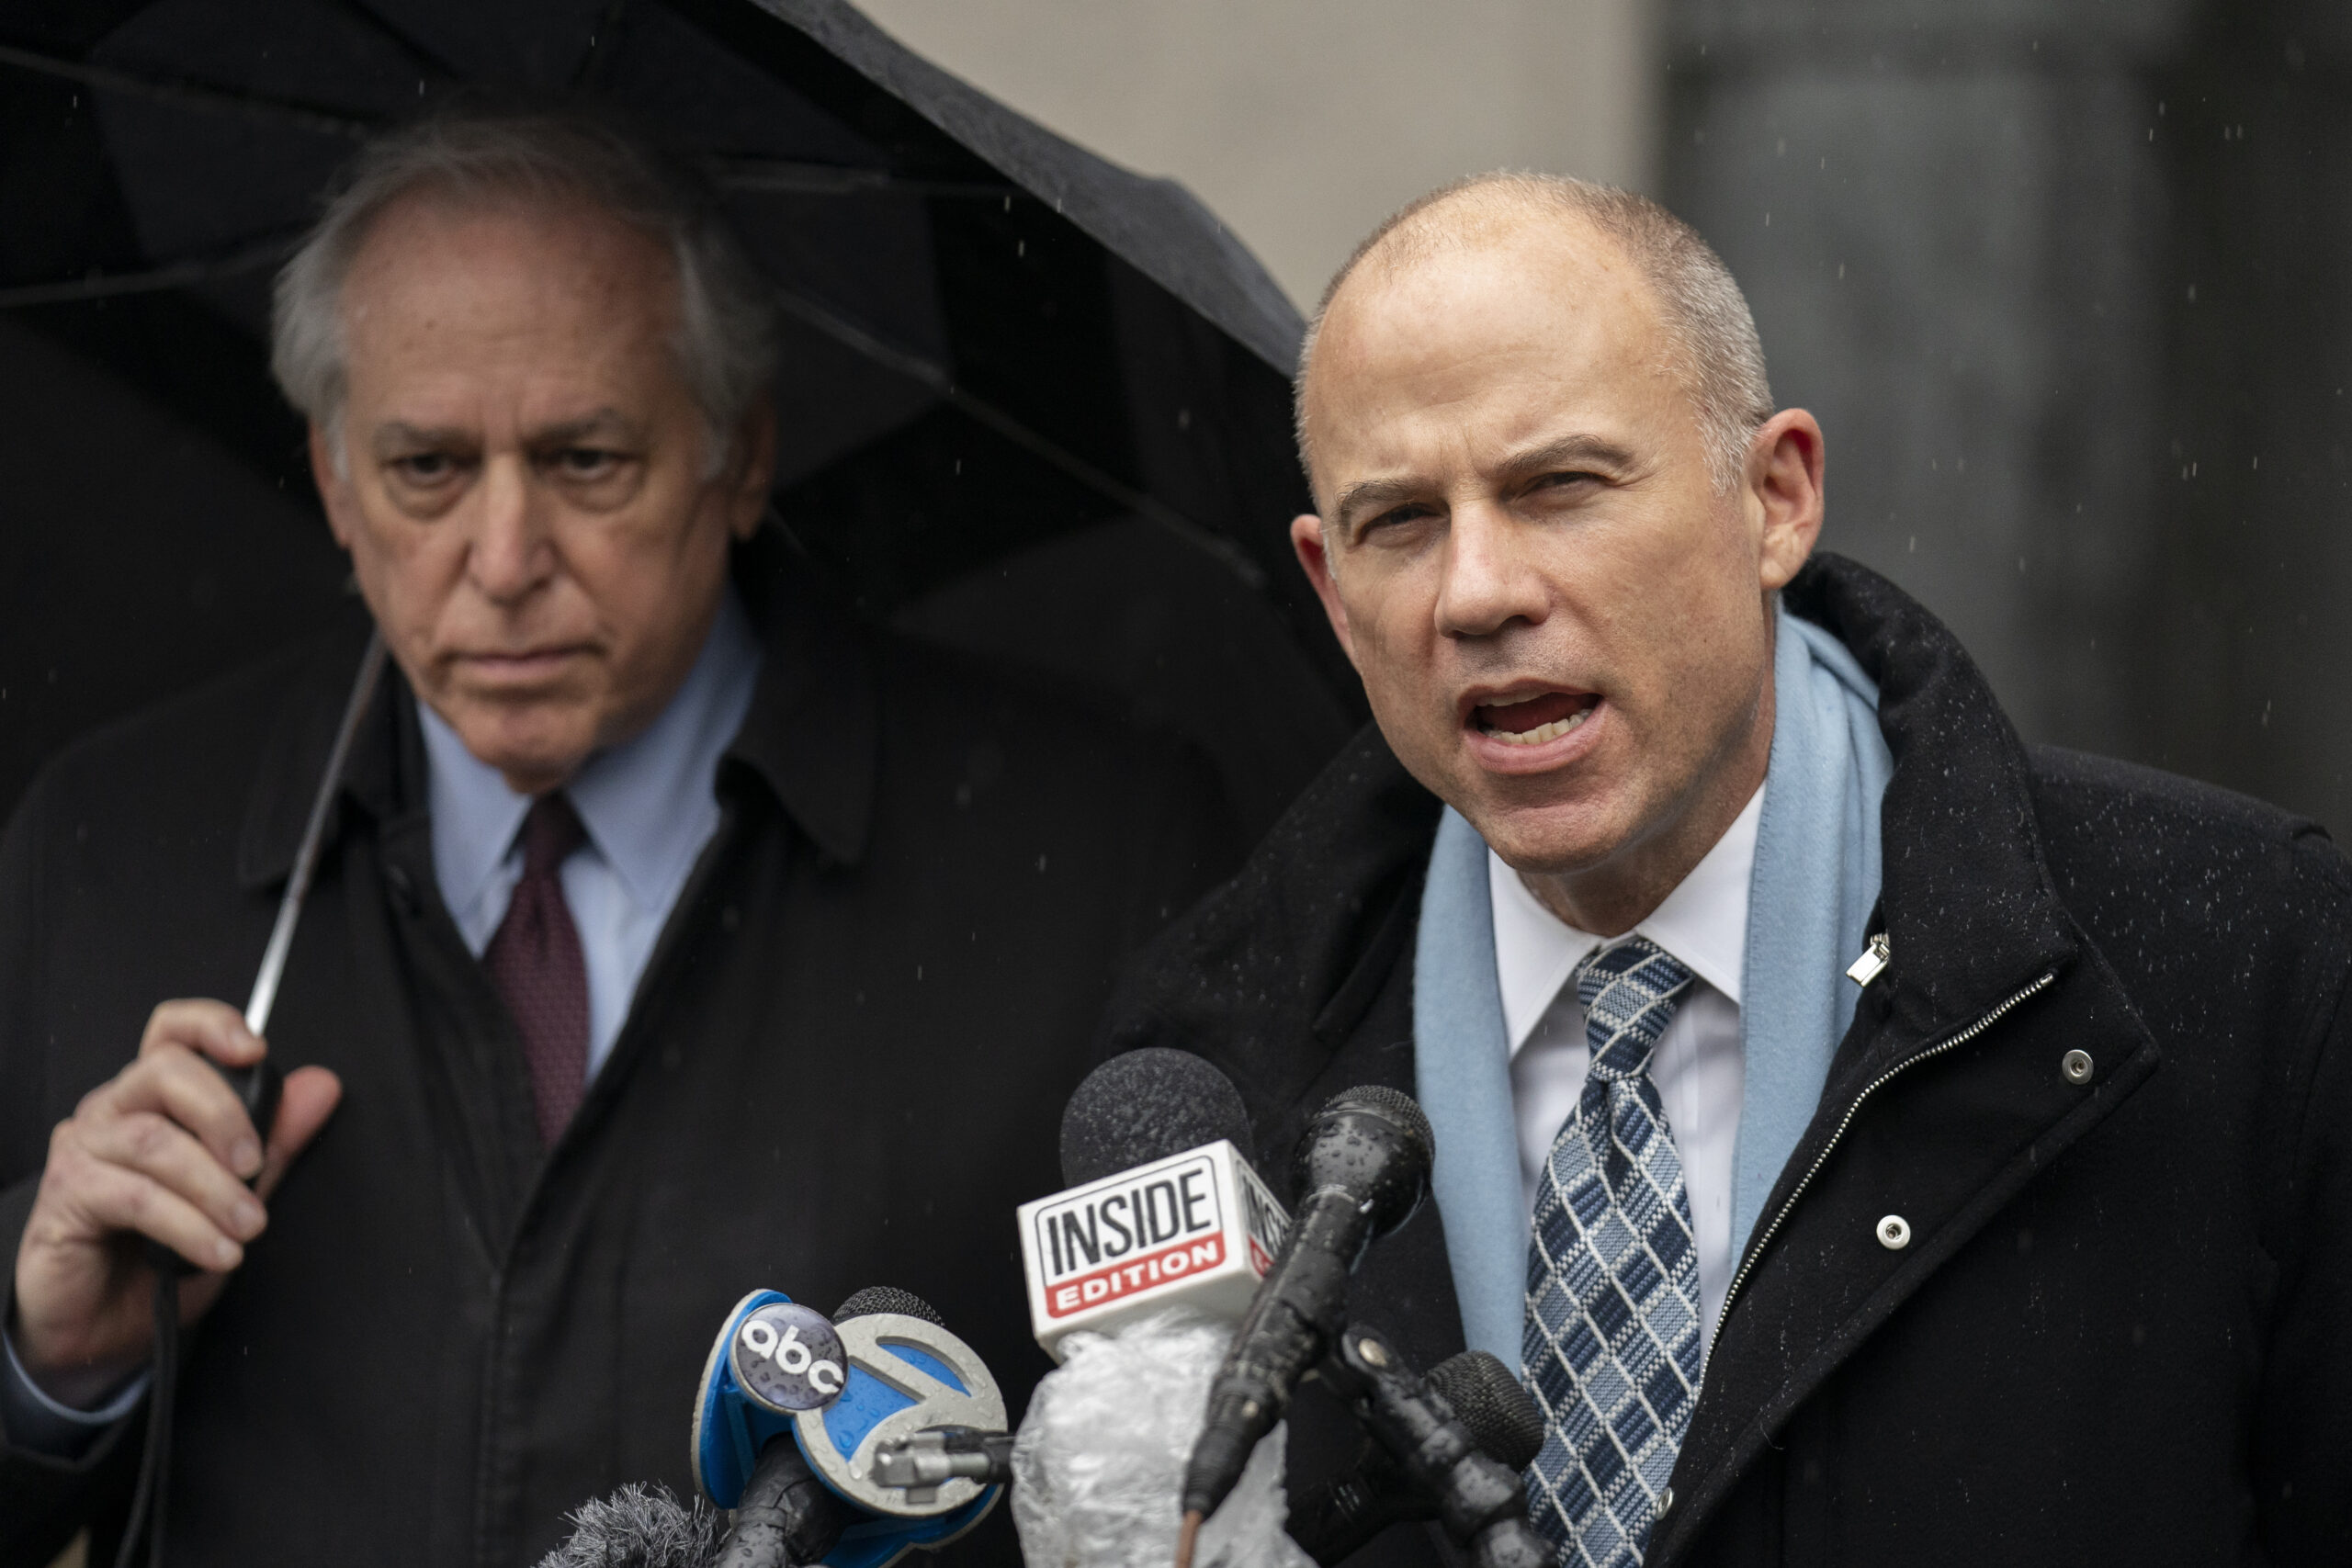 Michael Avenatti Tweets from Prison and Accuses Key Witness in Trump Trial of Lying